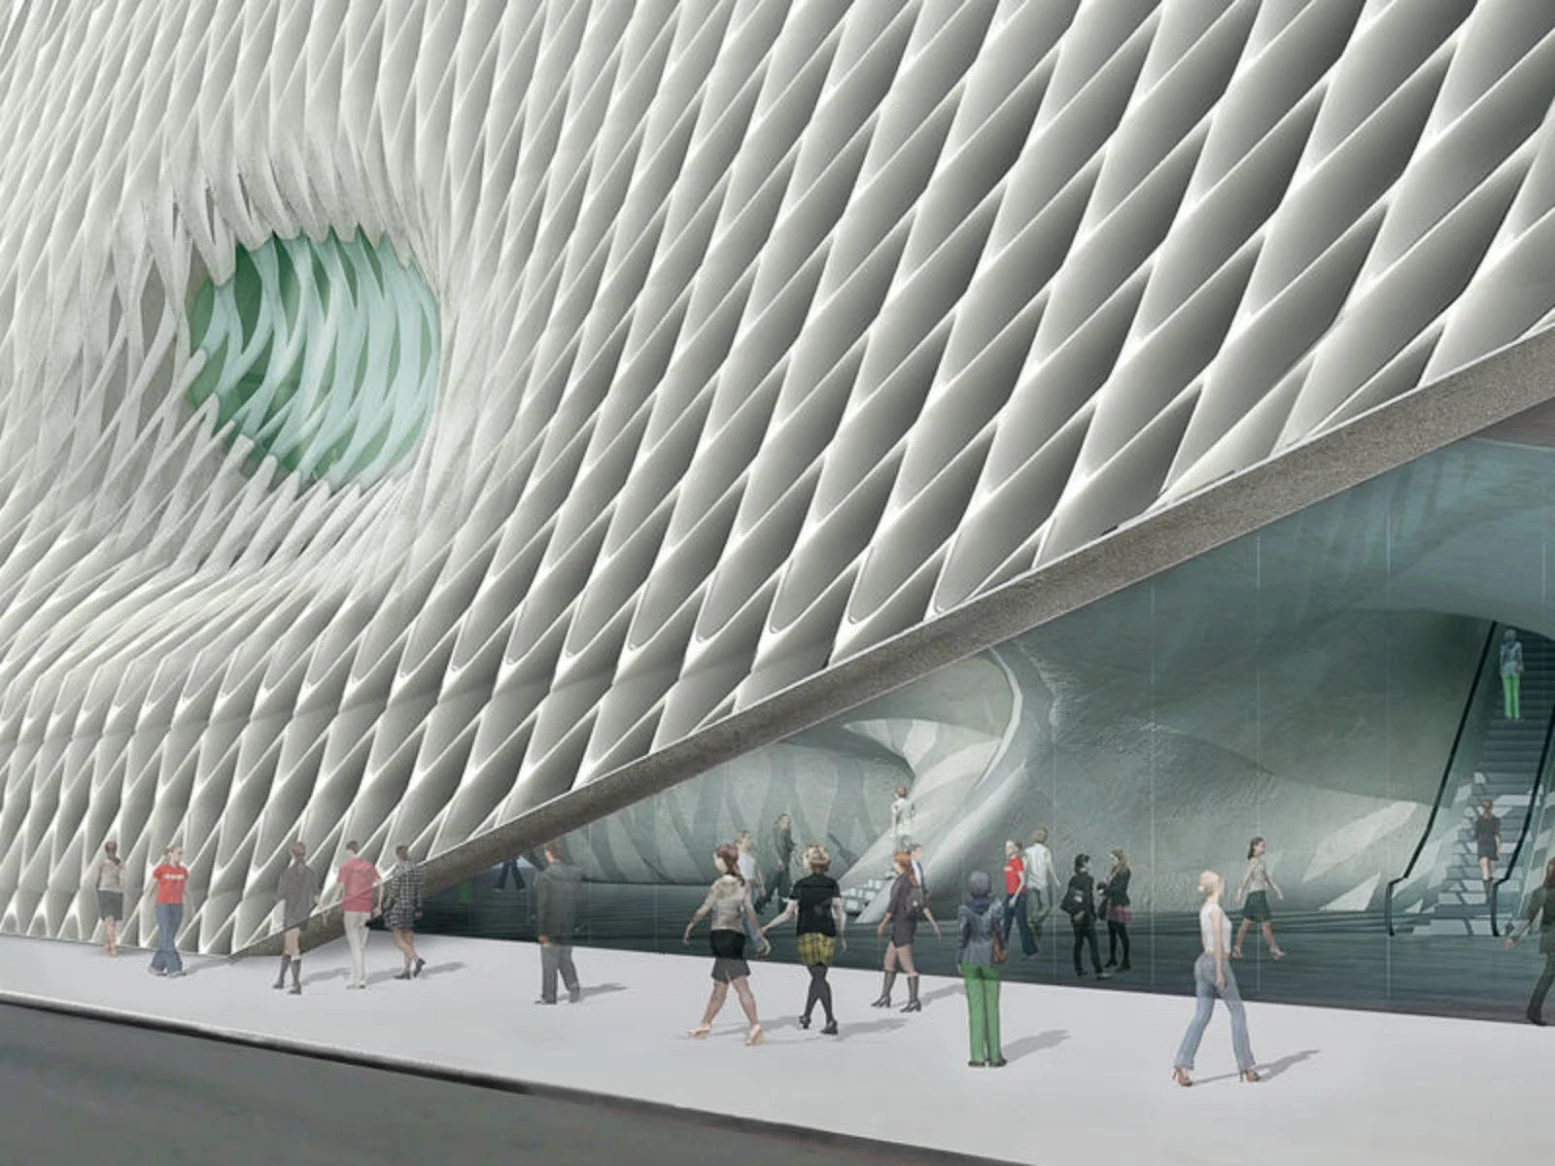 The Broad by Diller Scofidio Renfro